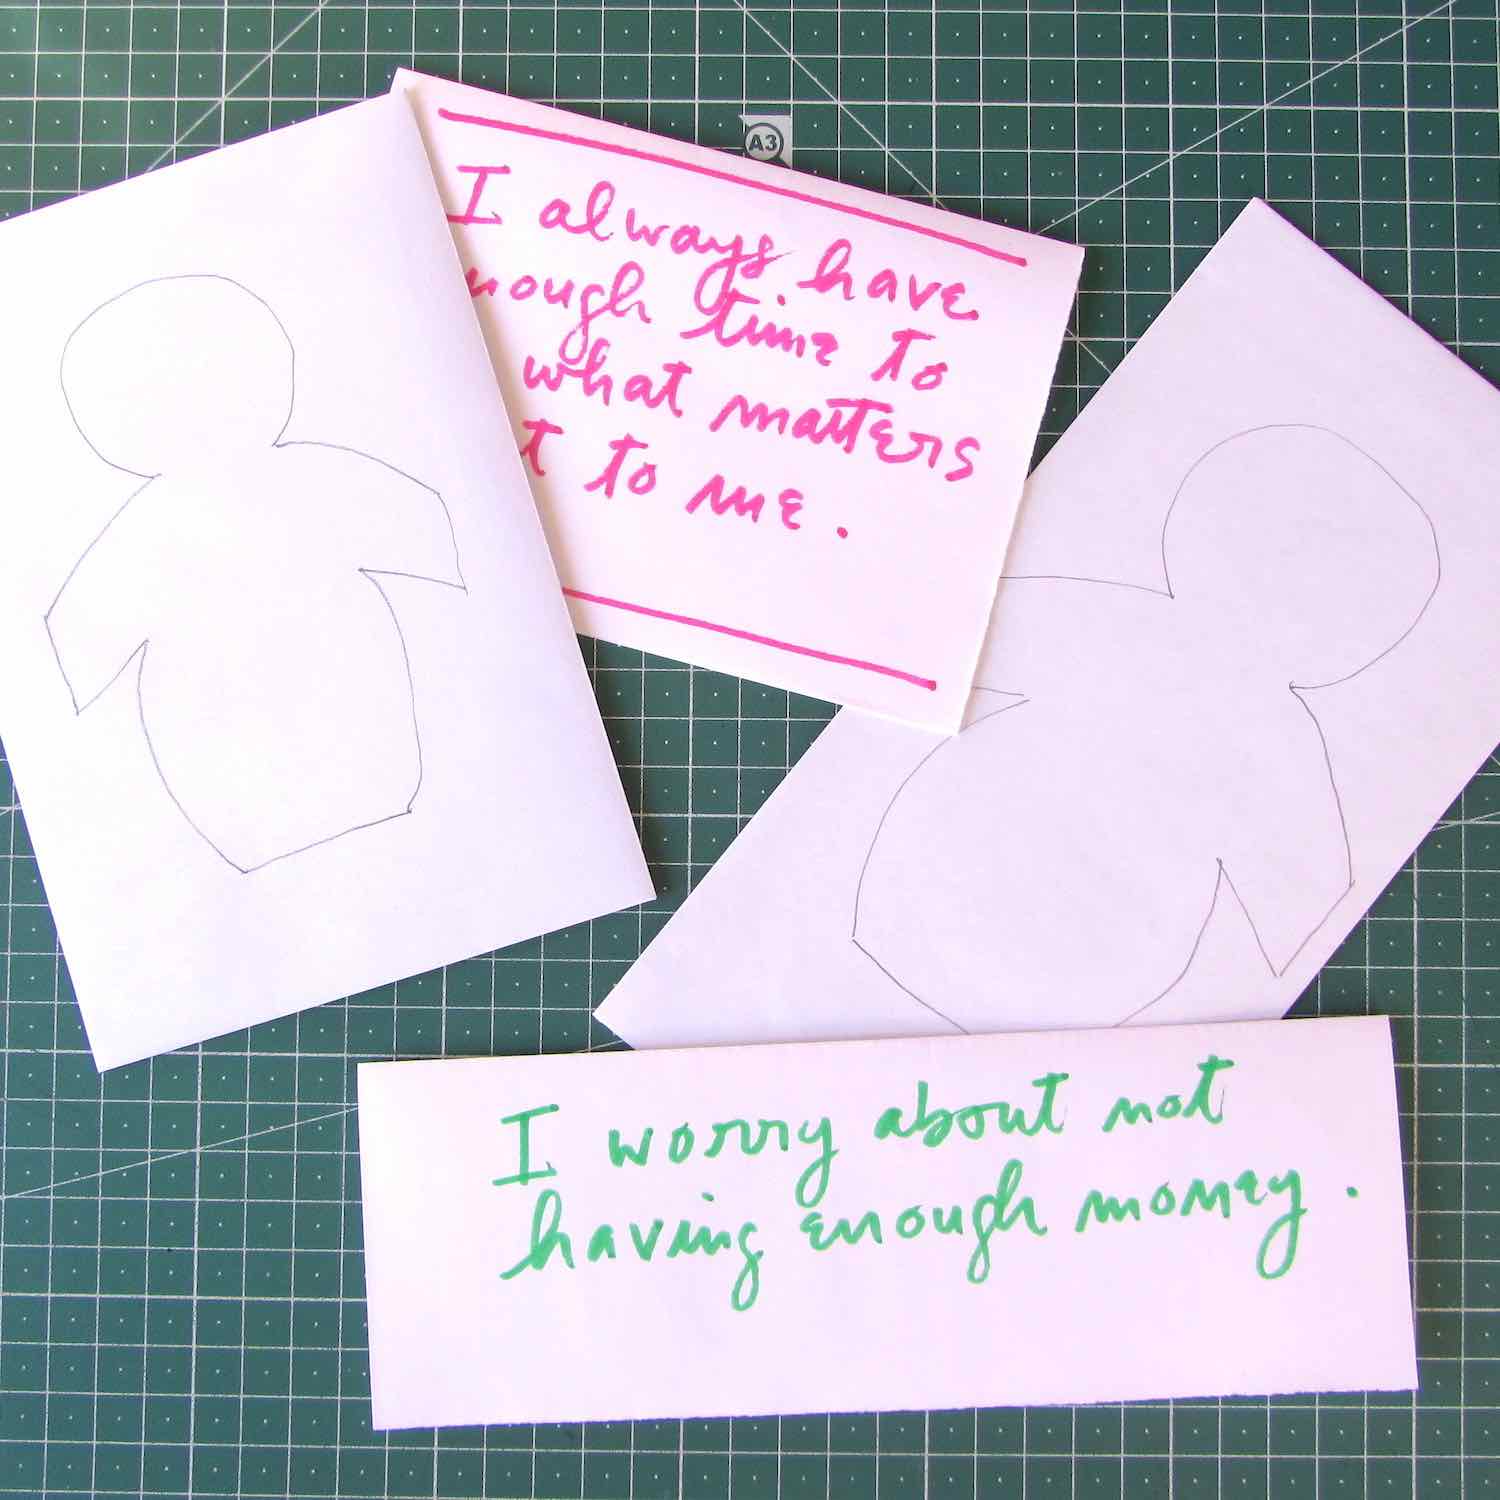 worry-dolls-play-time-online-workshop-worry-notes-envelopes_77c92425-0e06-45c2-8d7f-17c1fcebad46